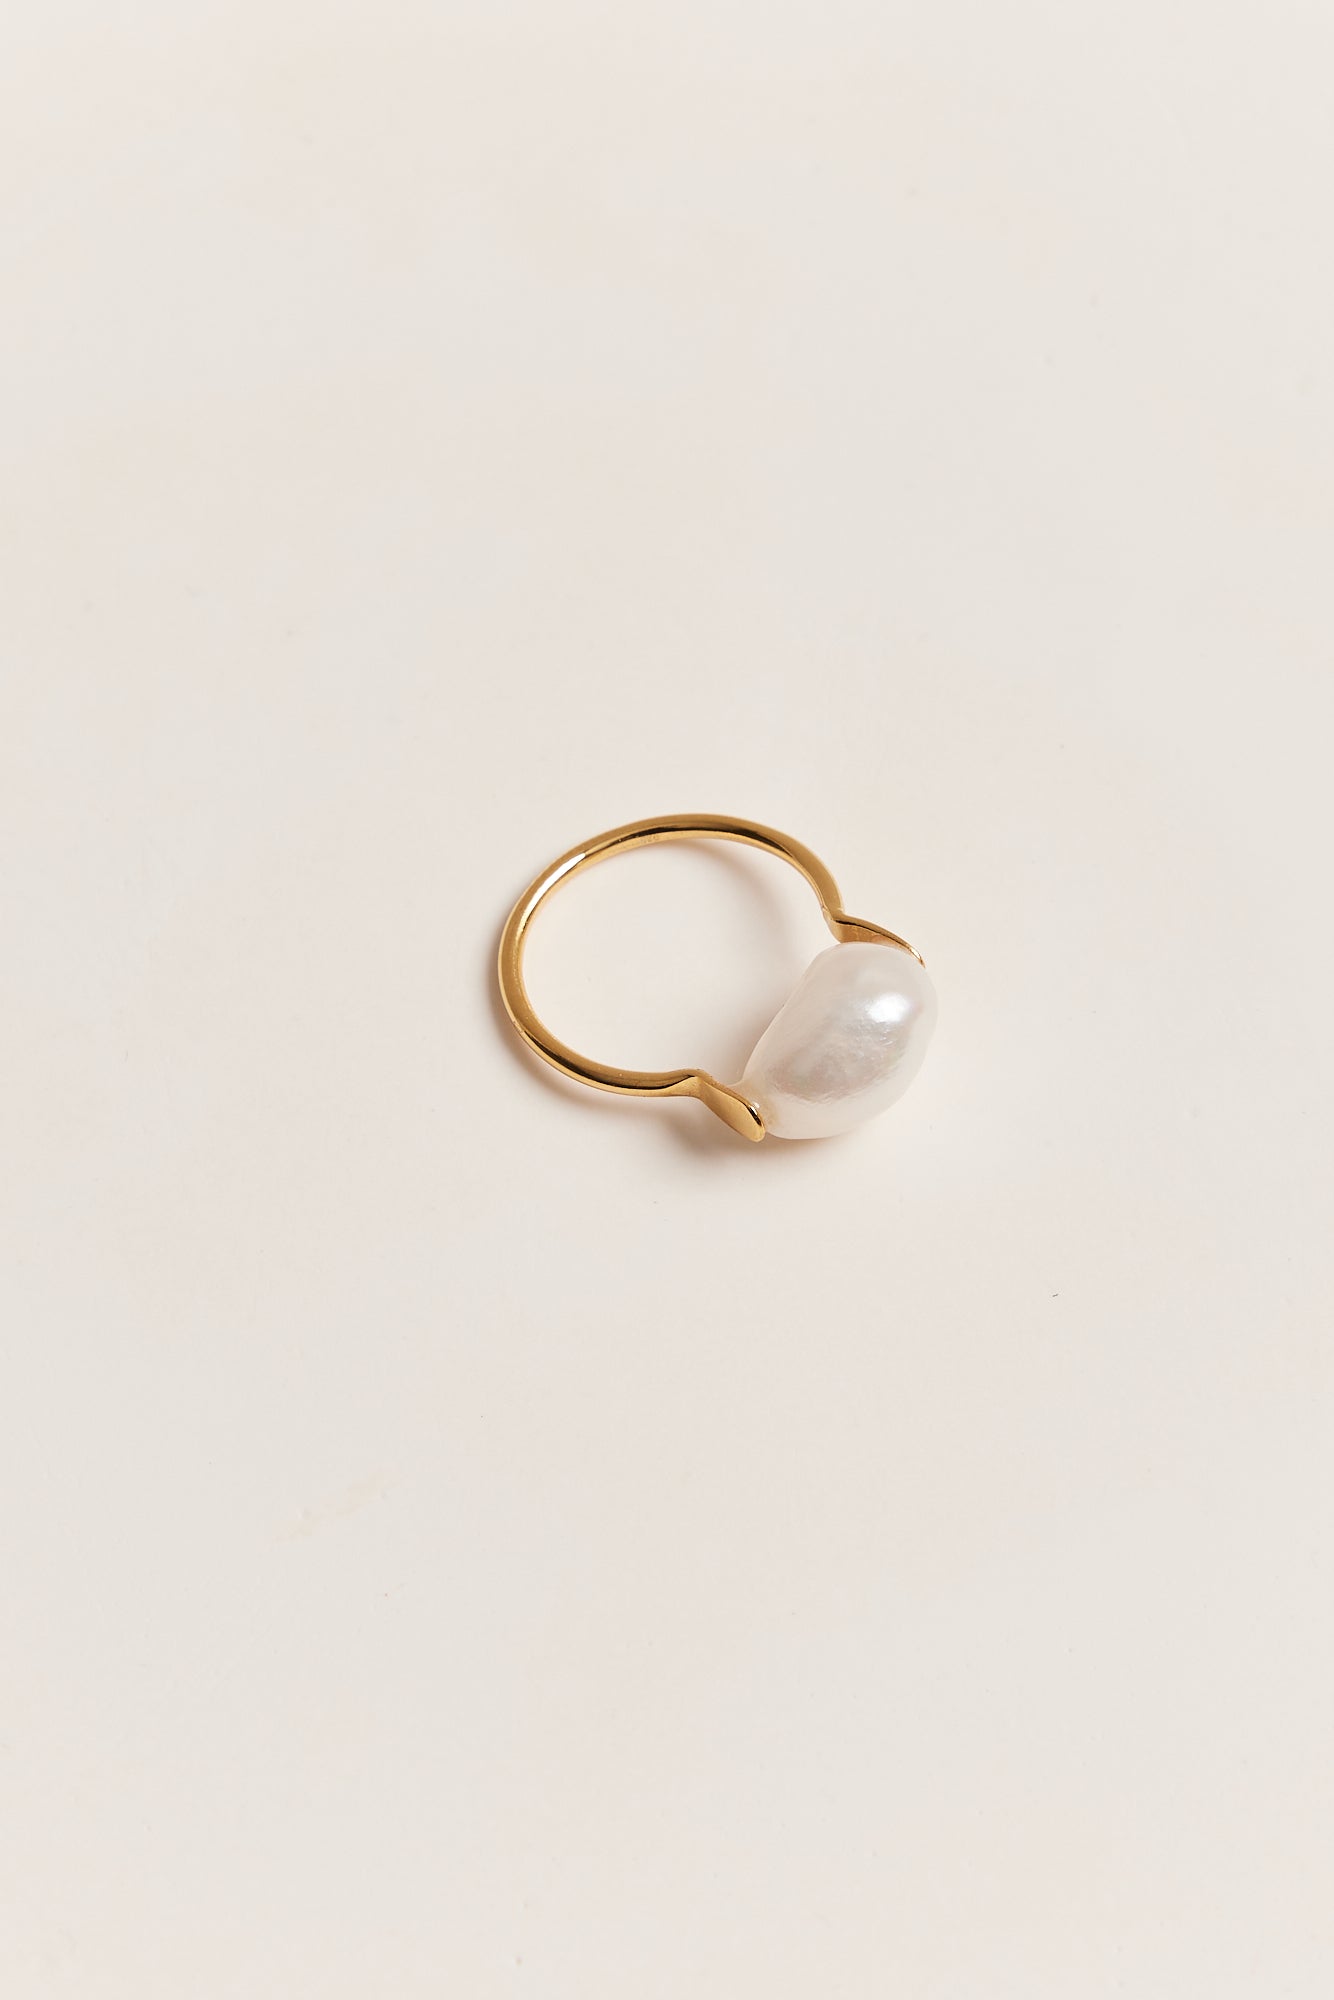 Thurston and Lovey Australian Jewellery for everyday – thurston and lovey